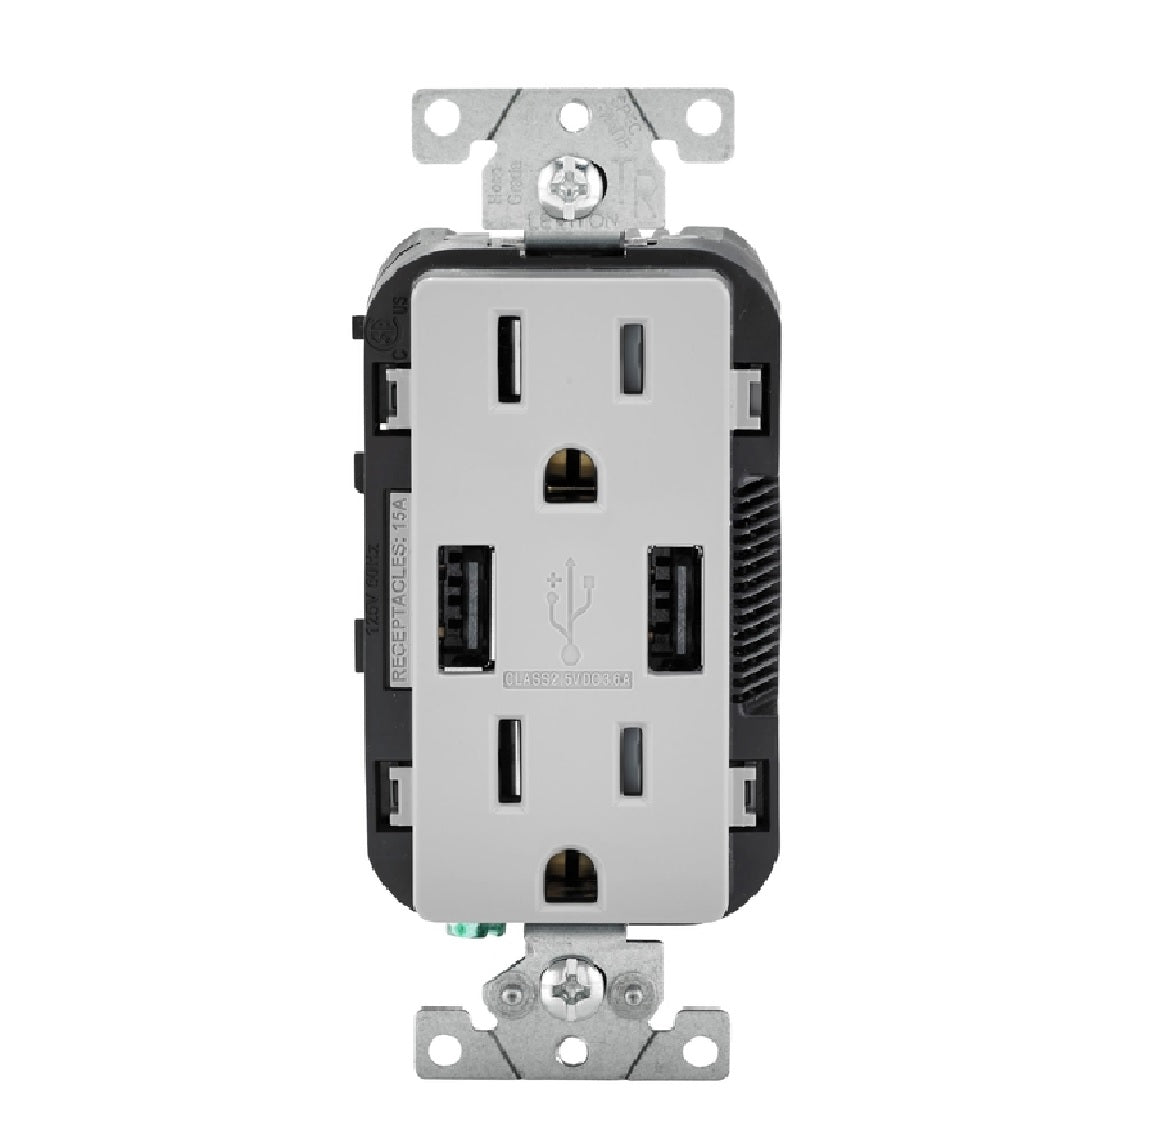 Leviton R09-T5632-0LG Duplex Outlet and USB Charger